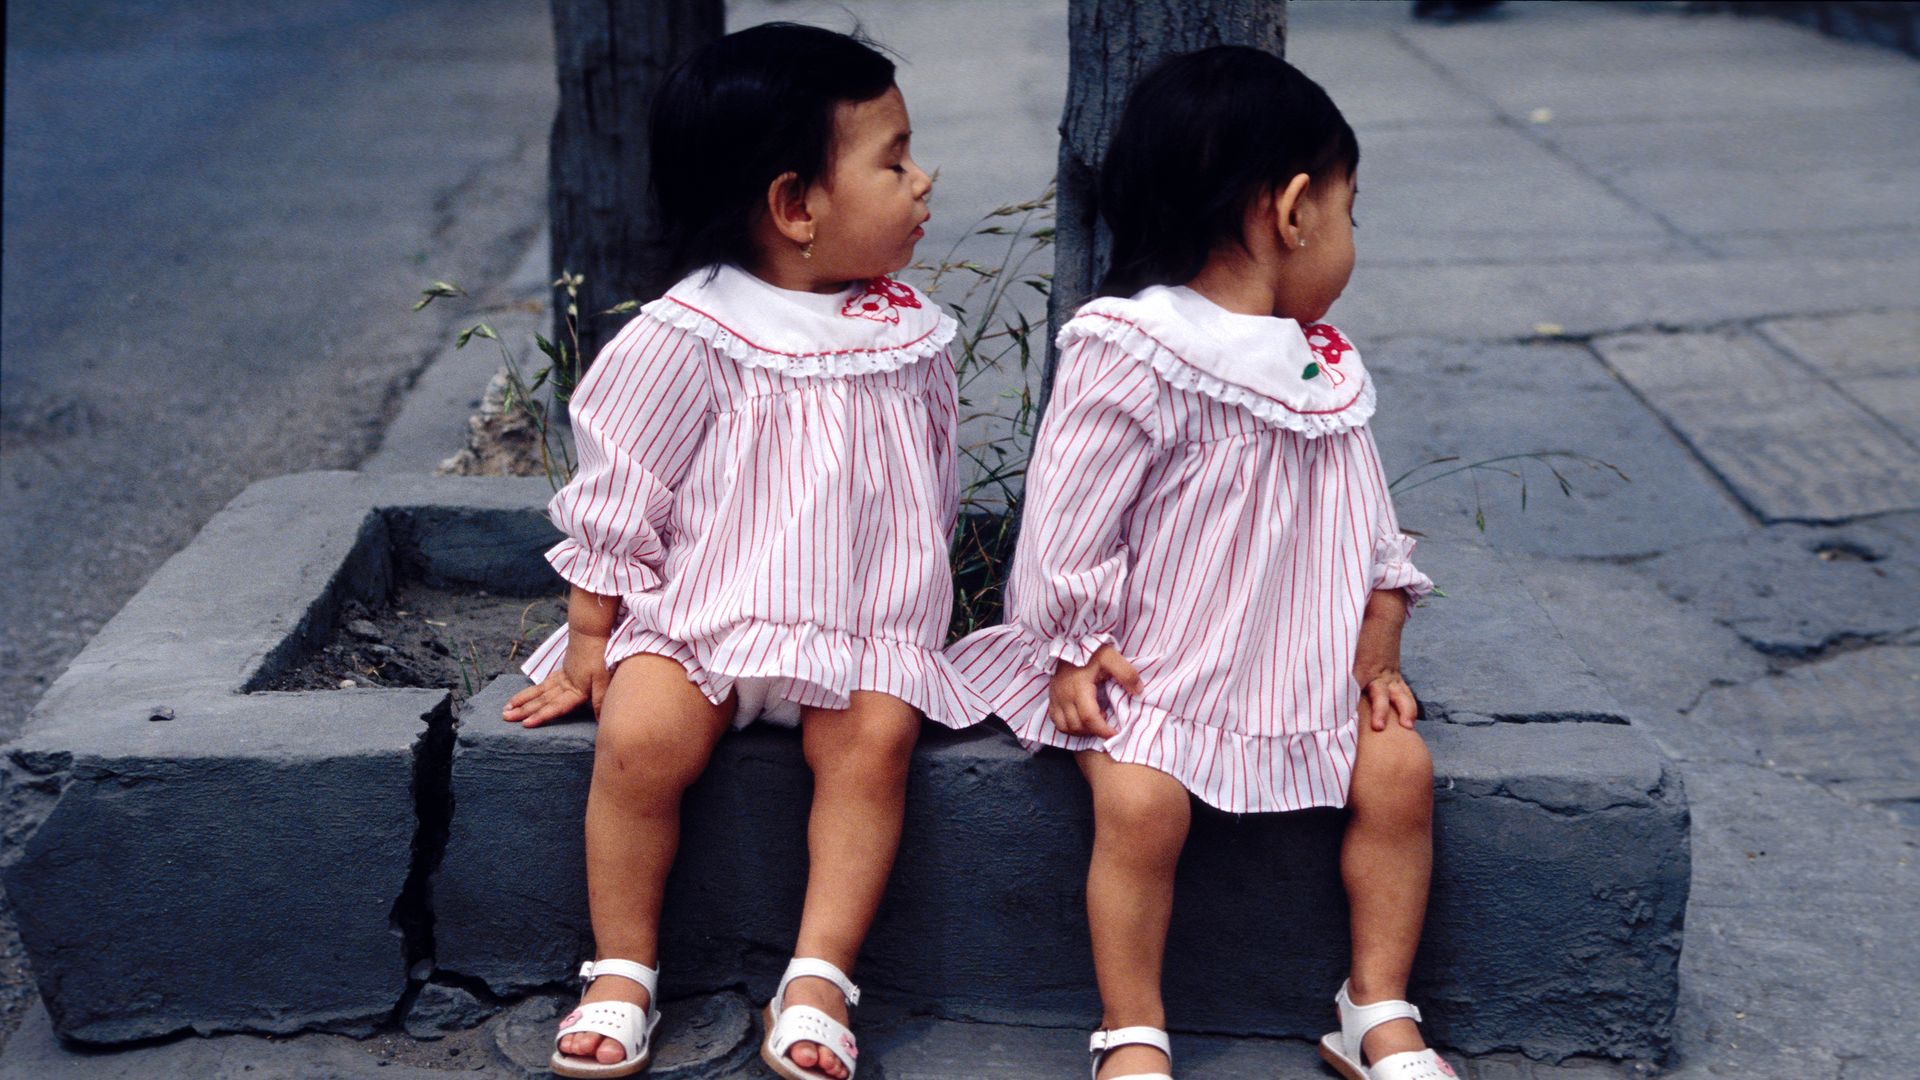 Two girls sitting next to each other in matching pink dresses